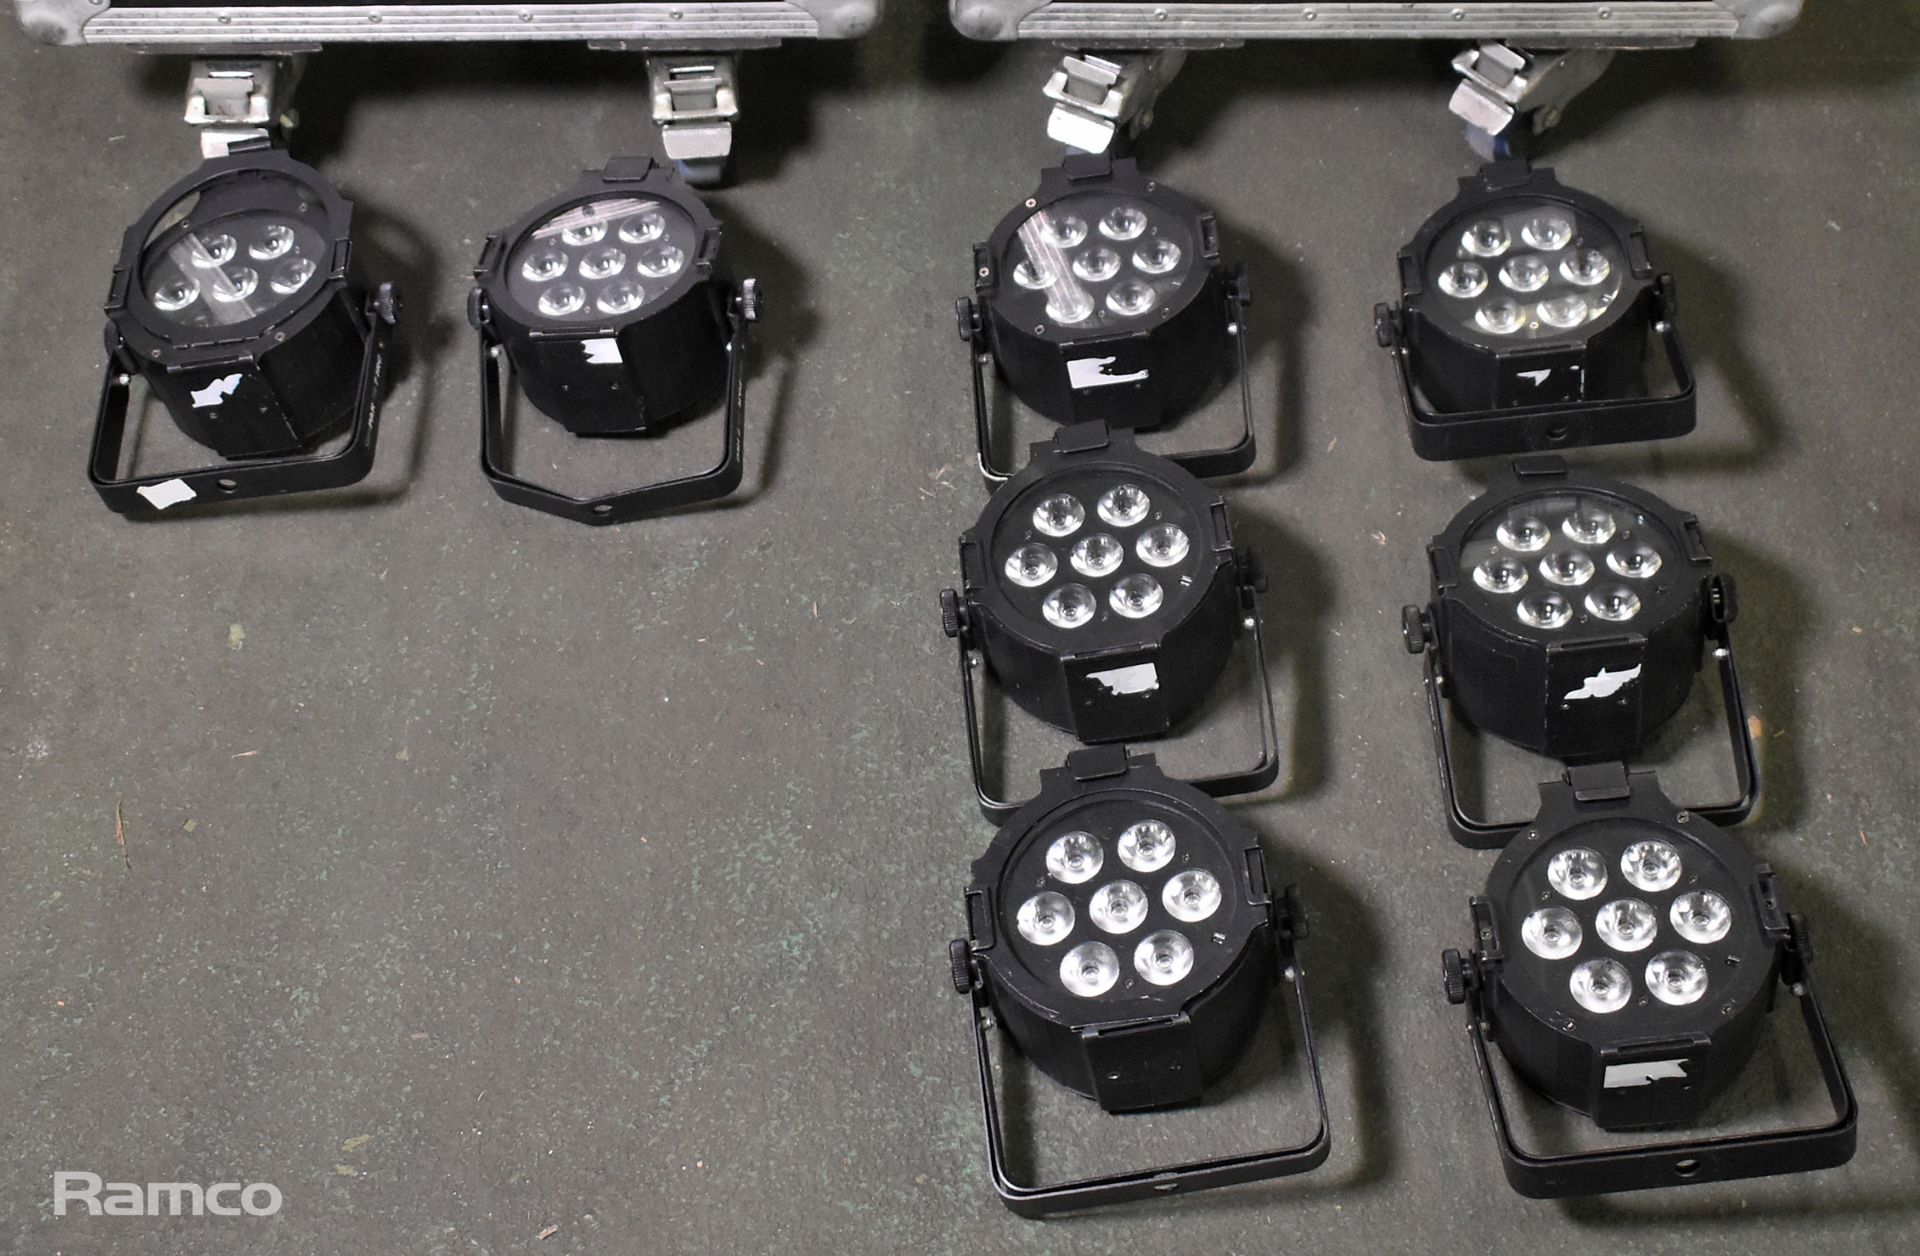 8x Chauvet LED SlimPar Tri7 IRC over 2 flight cases with power cables - Image 4 of 13